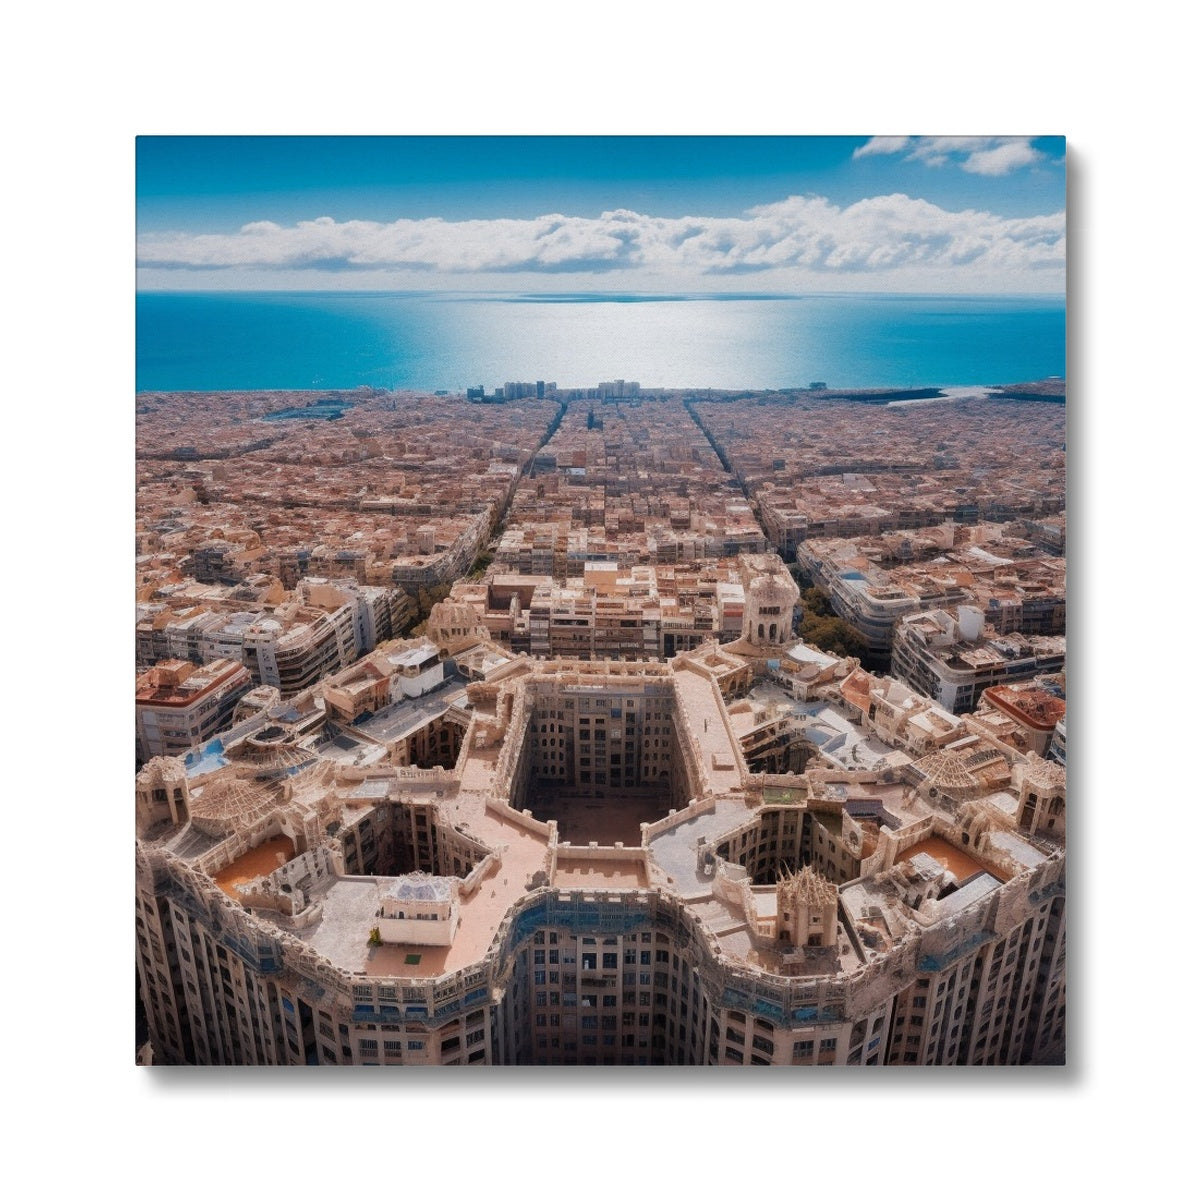 Barcelona Architecture From The Sky  Canvas